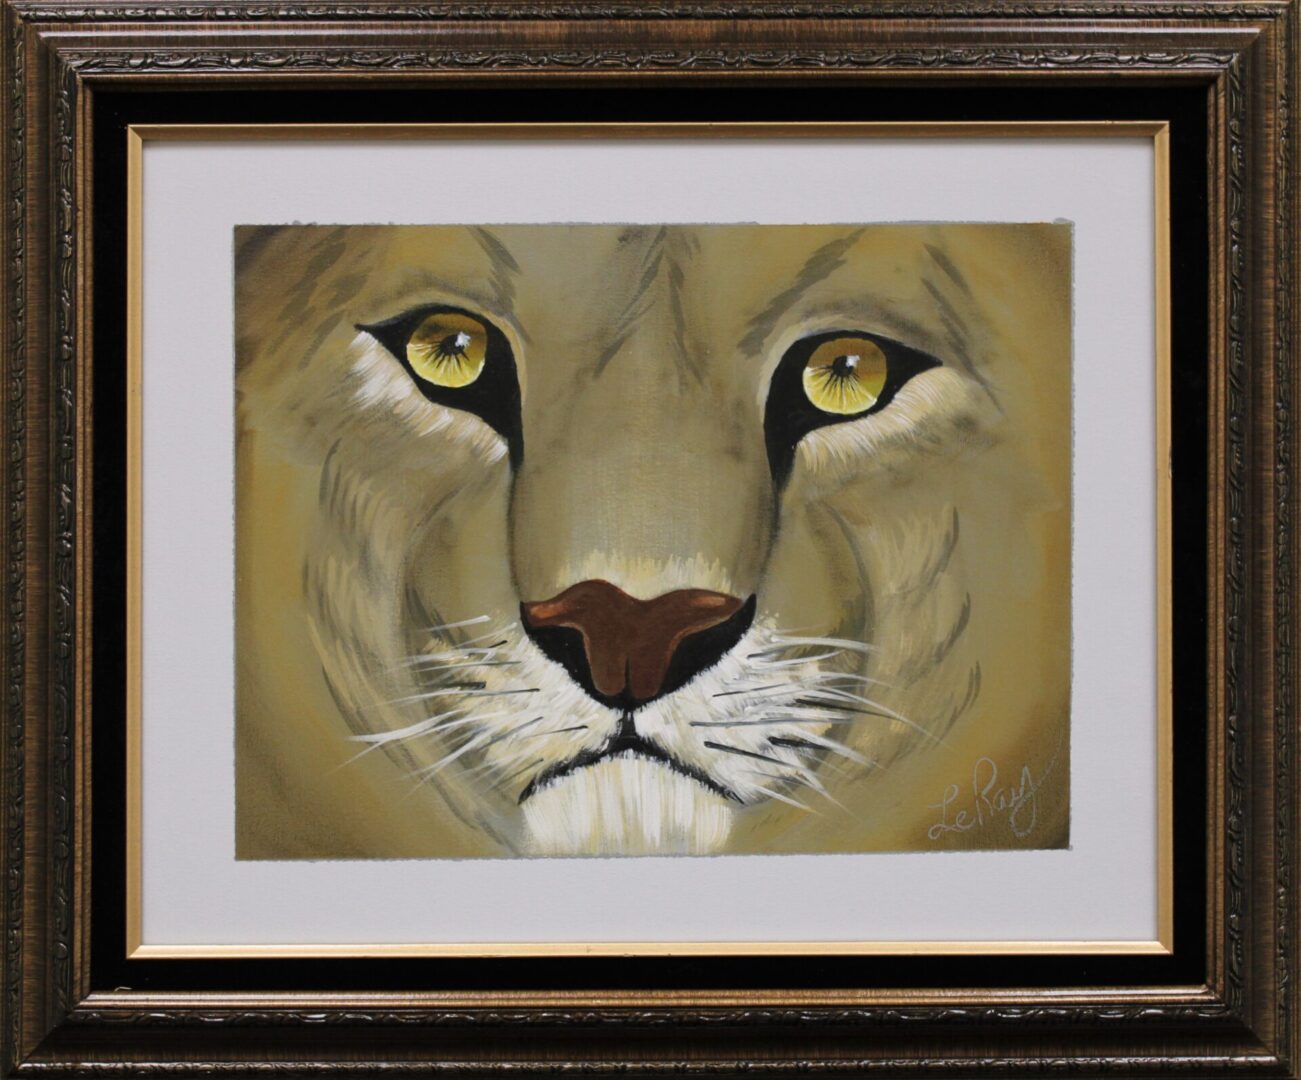 A framed painting of a lion’s face up close